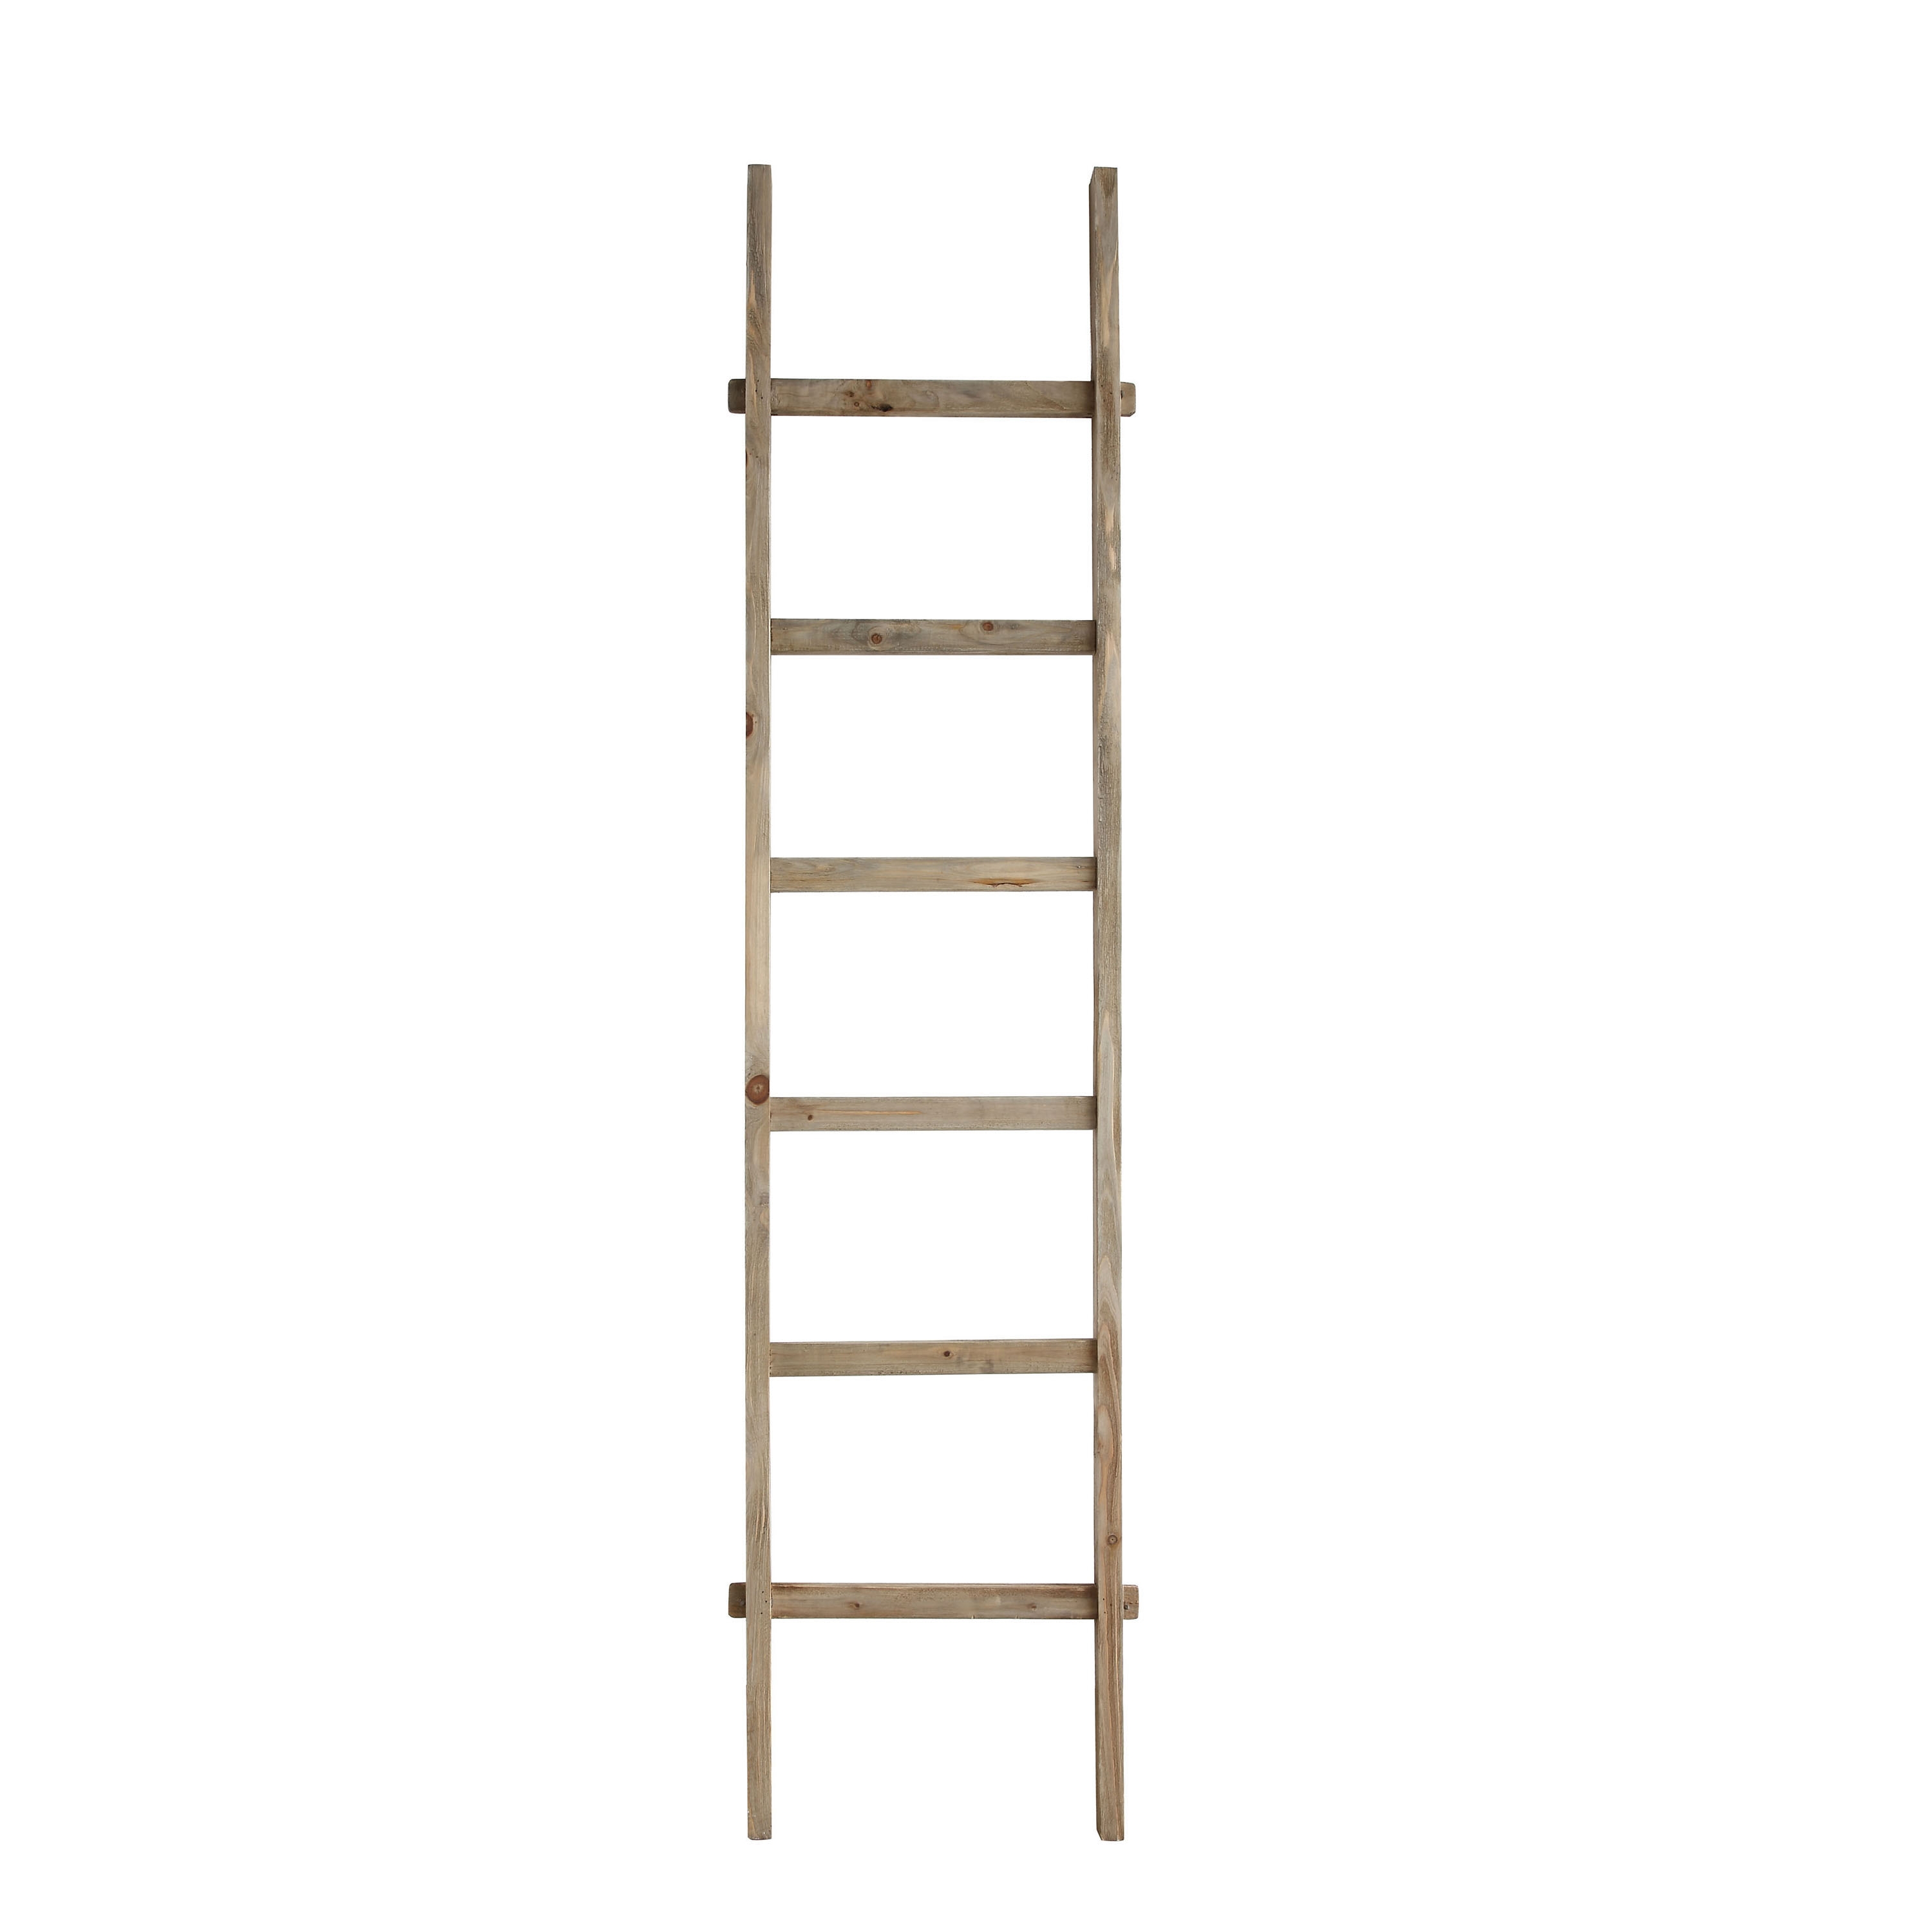 Rustic 76.75"H Decorative Fir Wood Ladder with 6 Rungs - Image 0